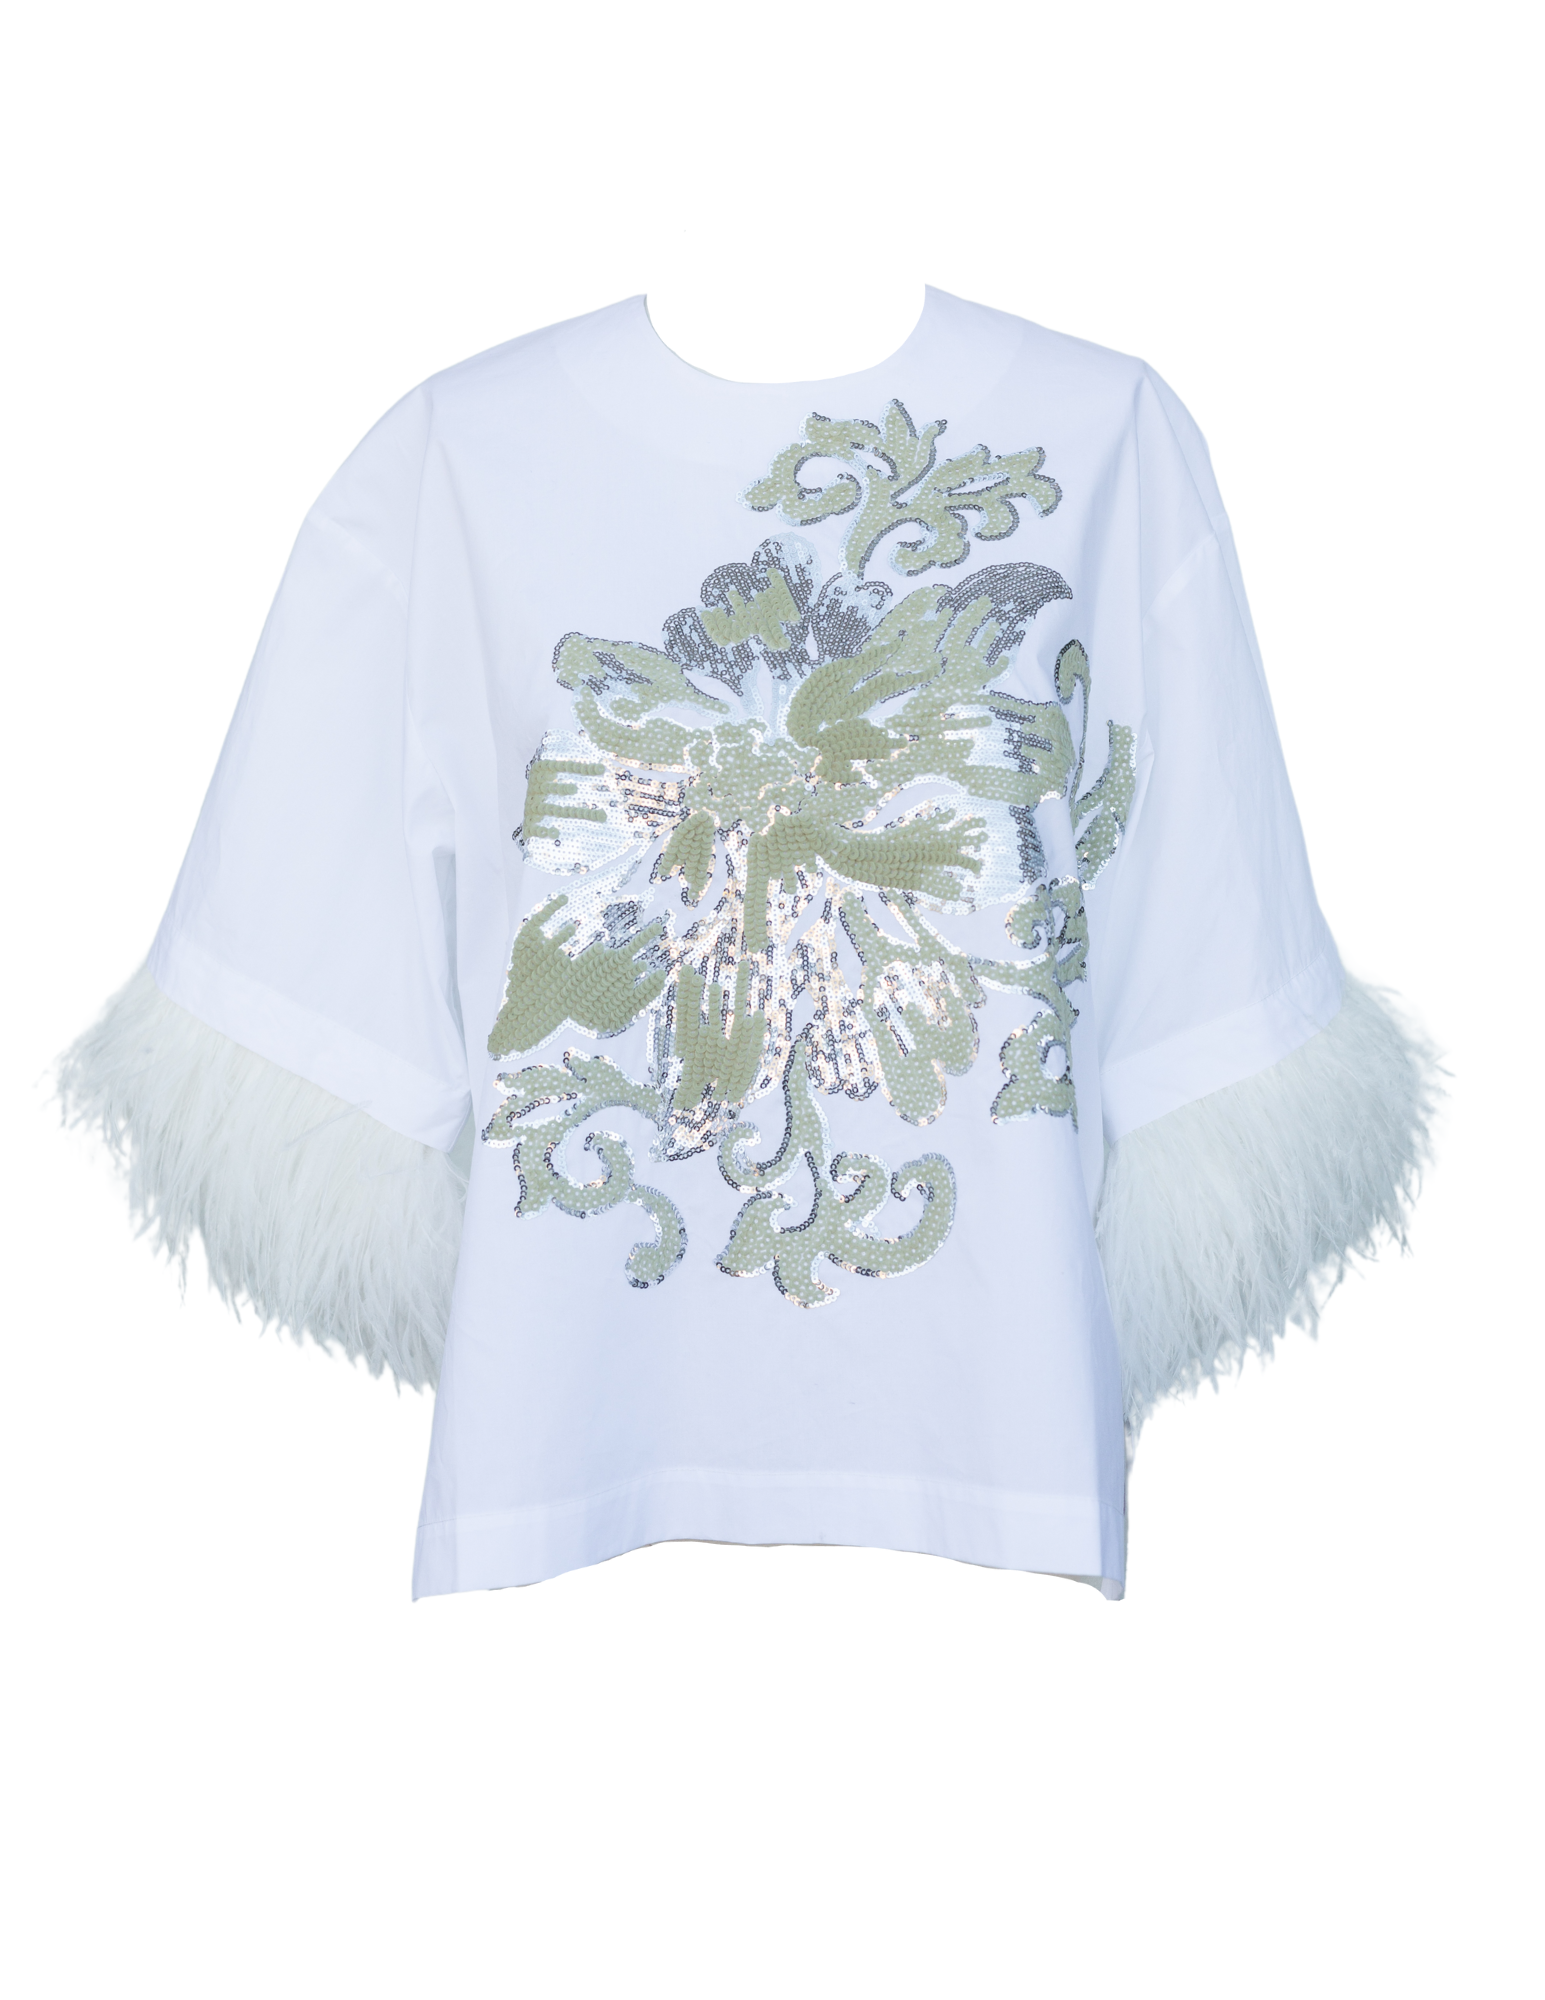 Sequin Top w/ Feathers - White